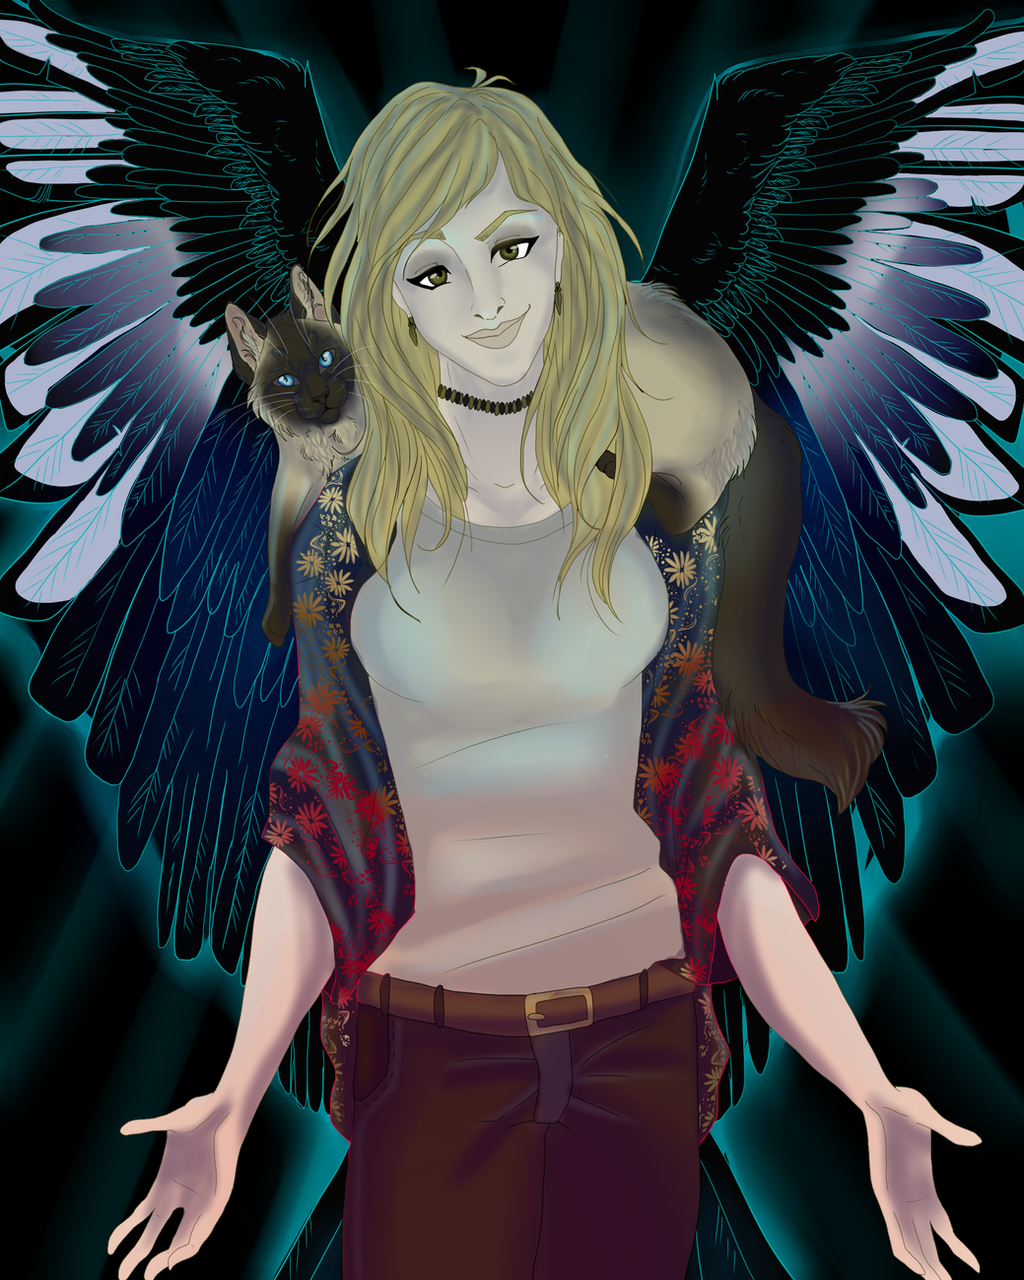 new_id_by_x_x_magpie_x_x-d8p7veu.png